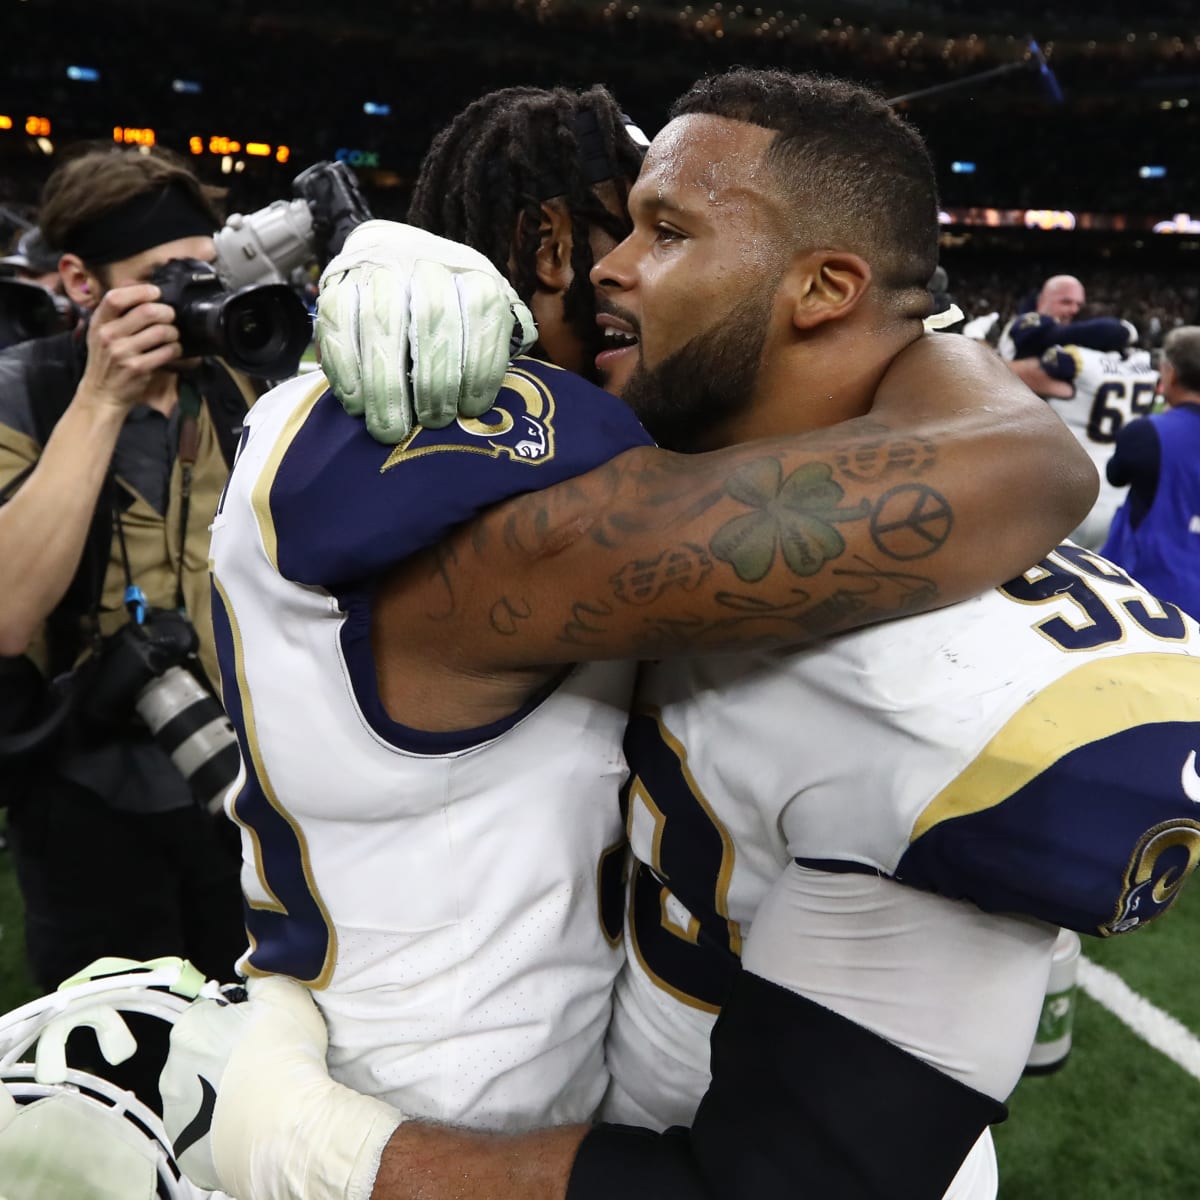 NFL Top 100 Players of 2019: Aaron Donald of LA Rams named No. 1